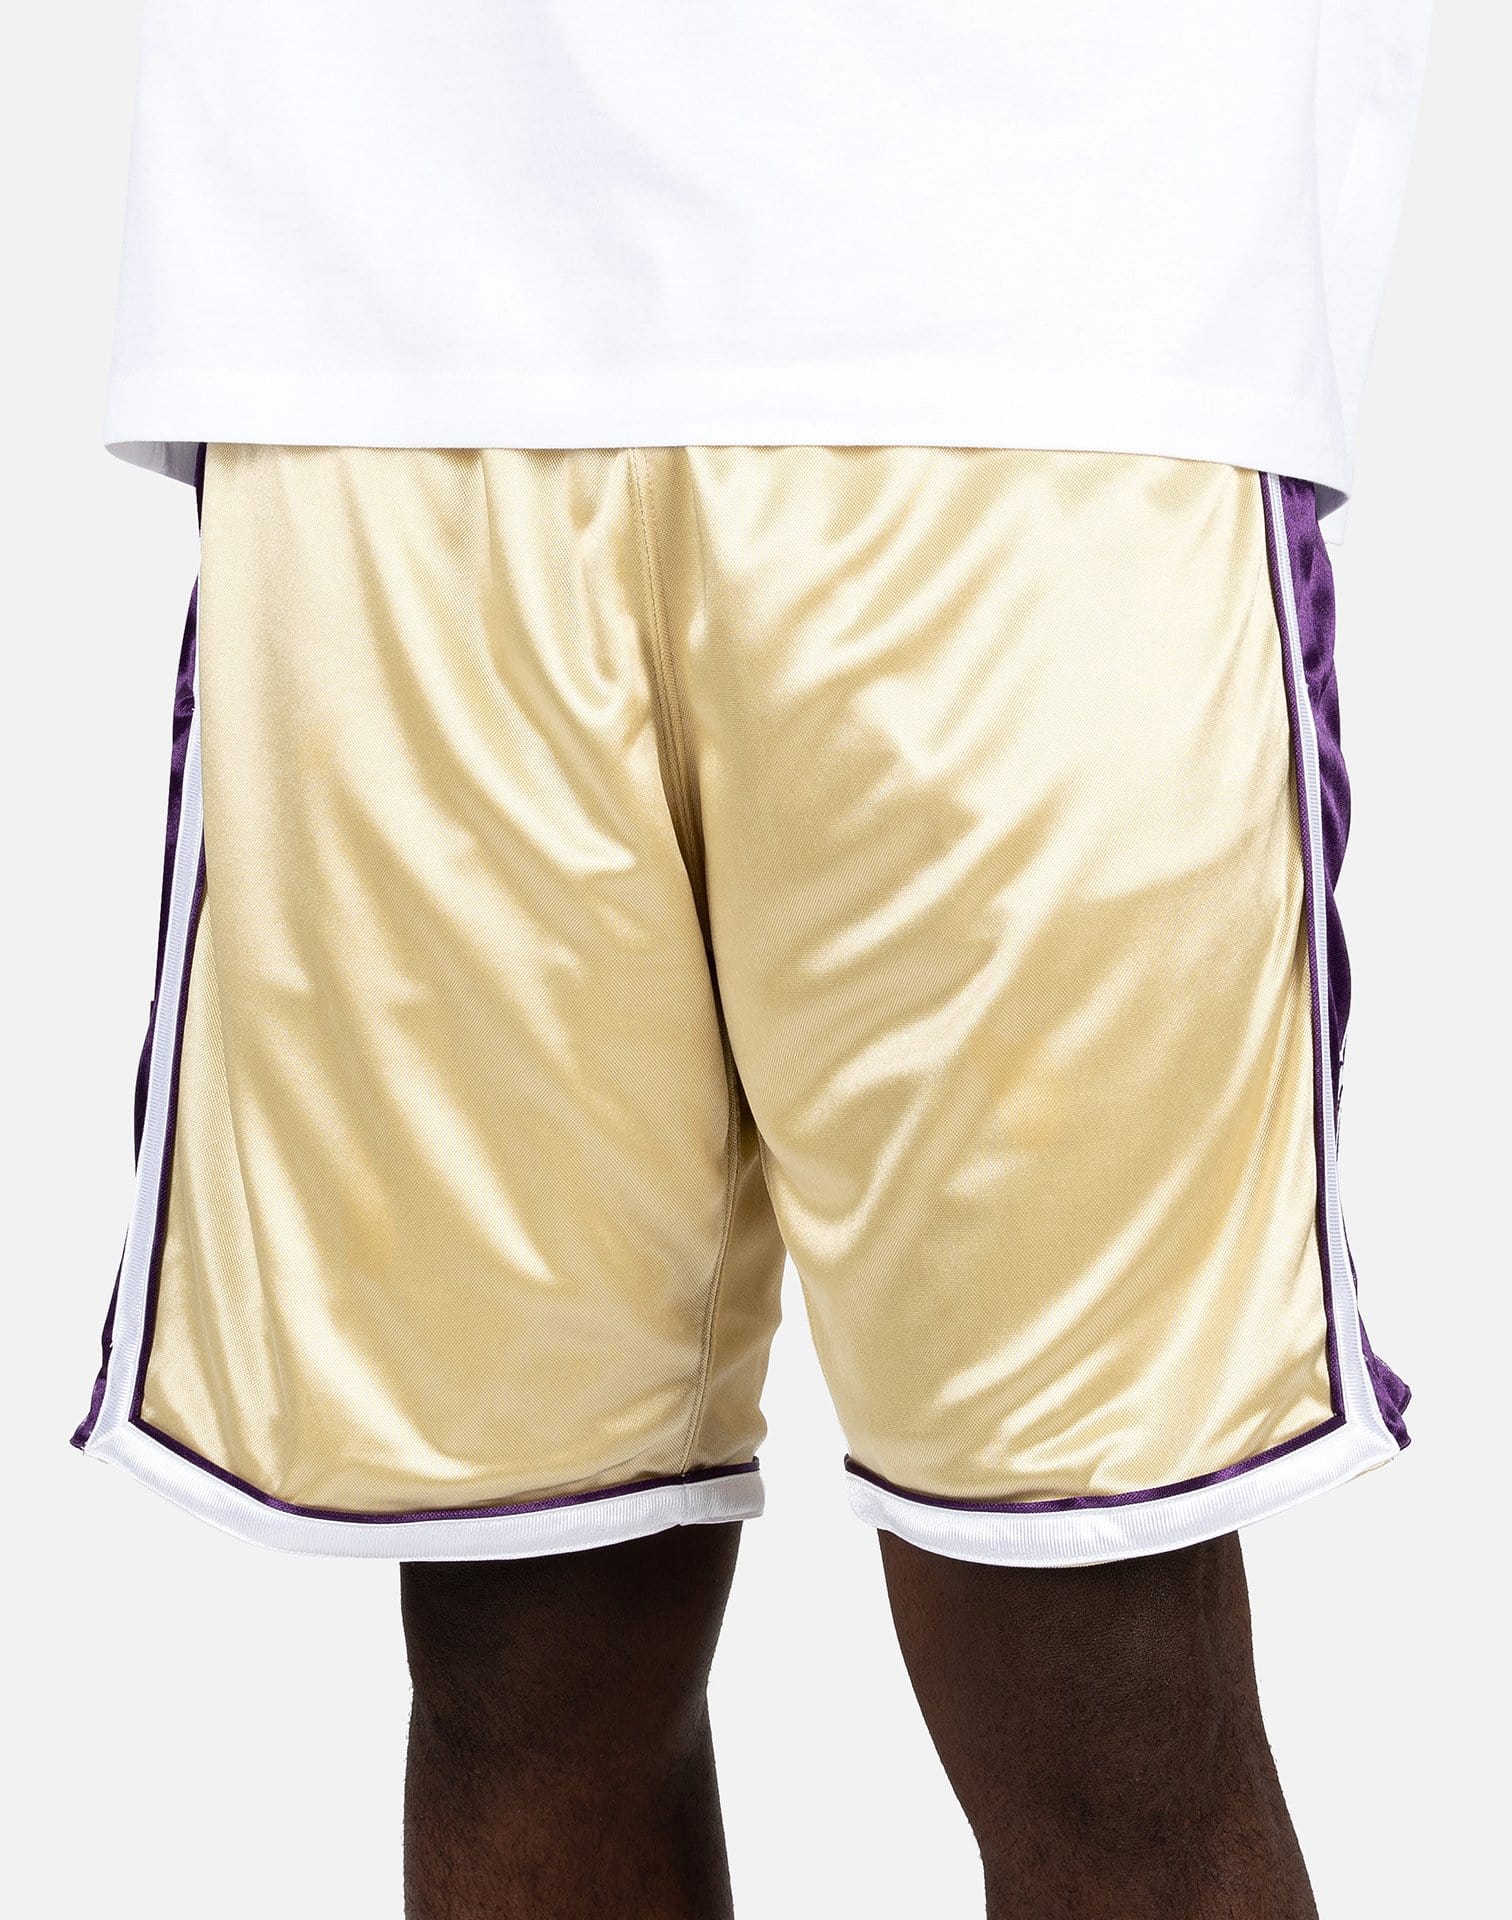 Mitchell & Ness NBA LA LAKERS KOBE BRYANT AUTHENTIC HALL OF FAME JERSEY SHORTS  - Gold - Size: 2XLG